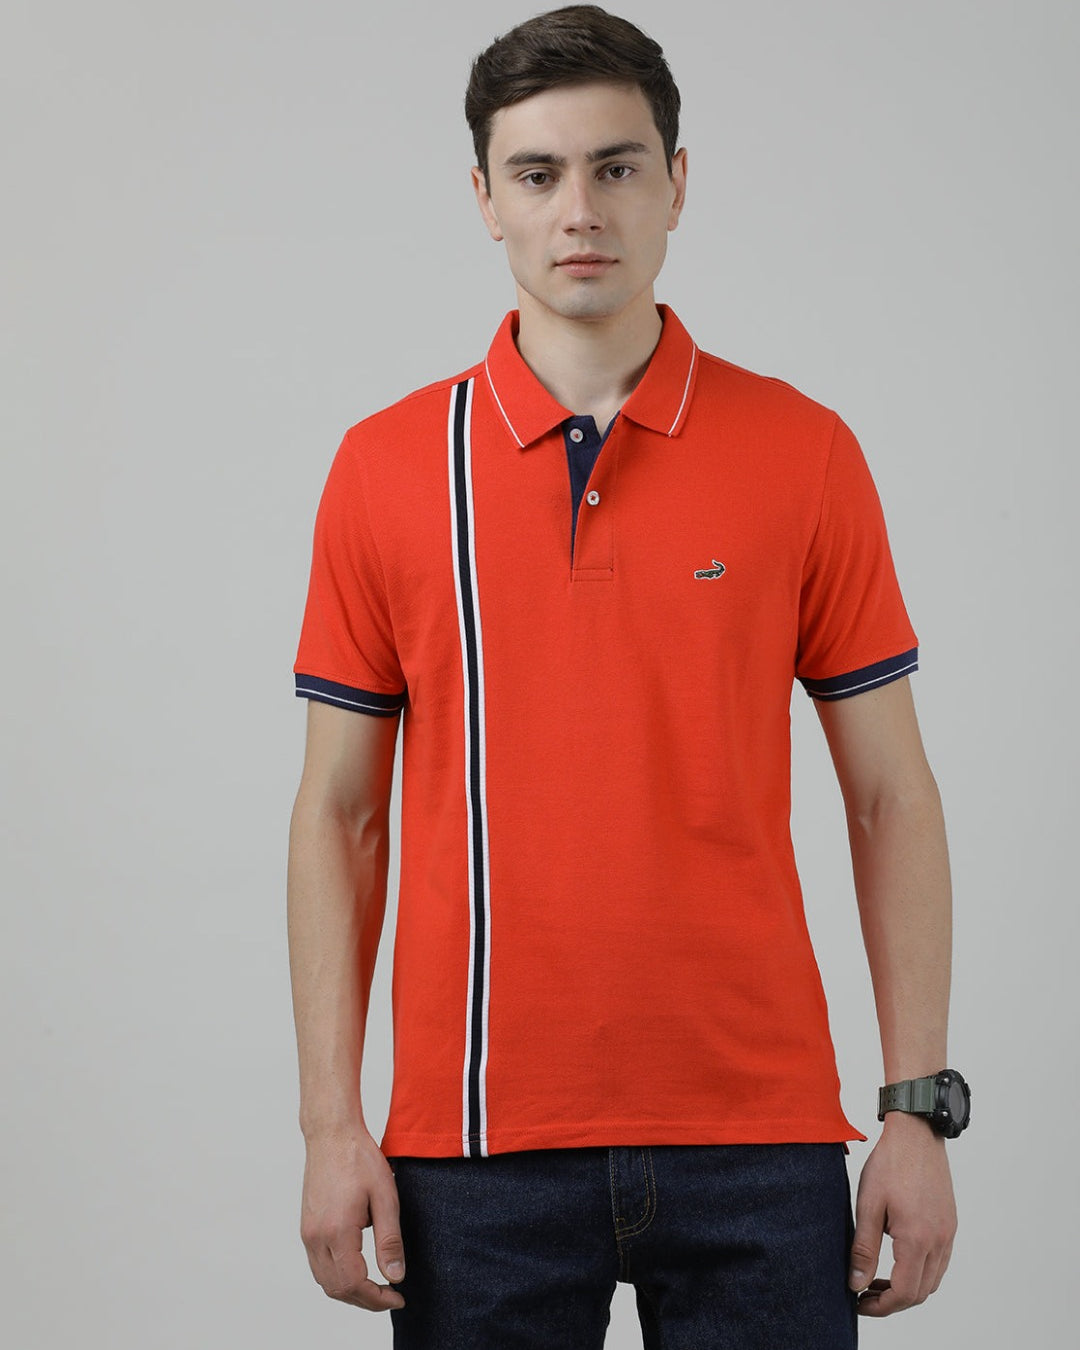 Casual Red Solid Polo T-Shirt Half Sleeve Slim Fit with Collar for Men